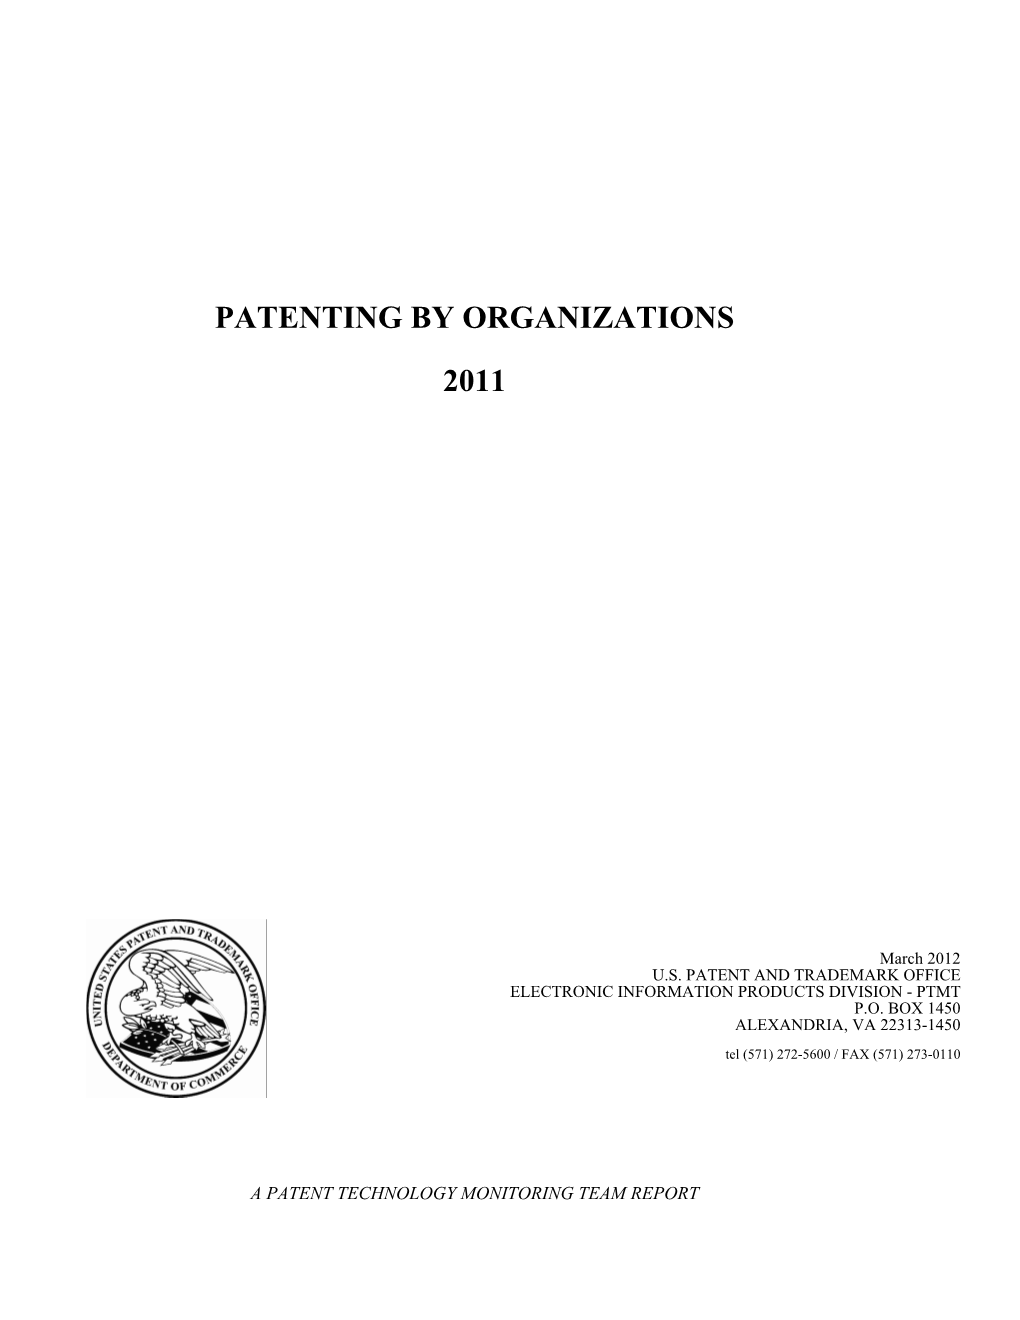 Patenting by Organizations 2011